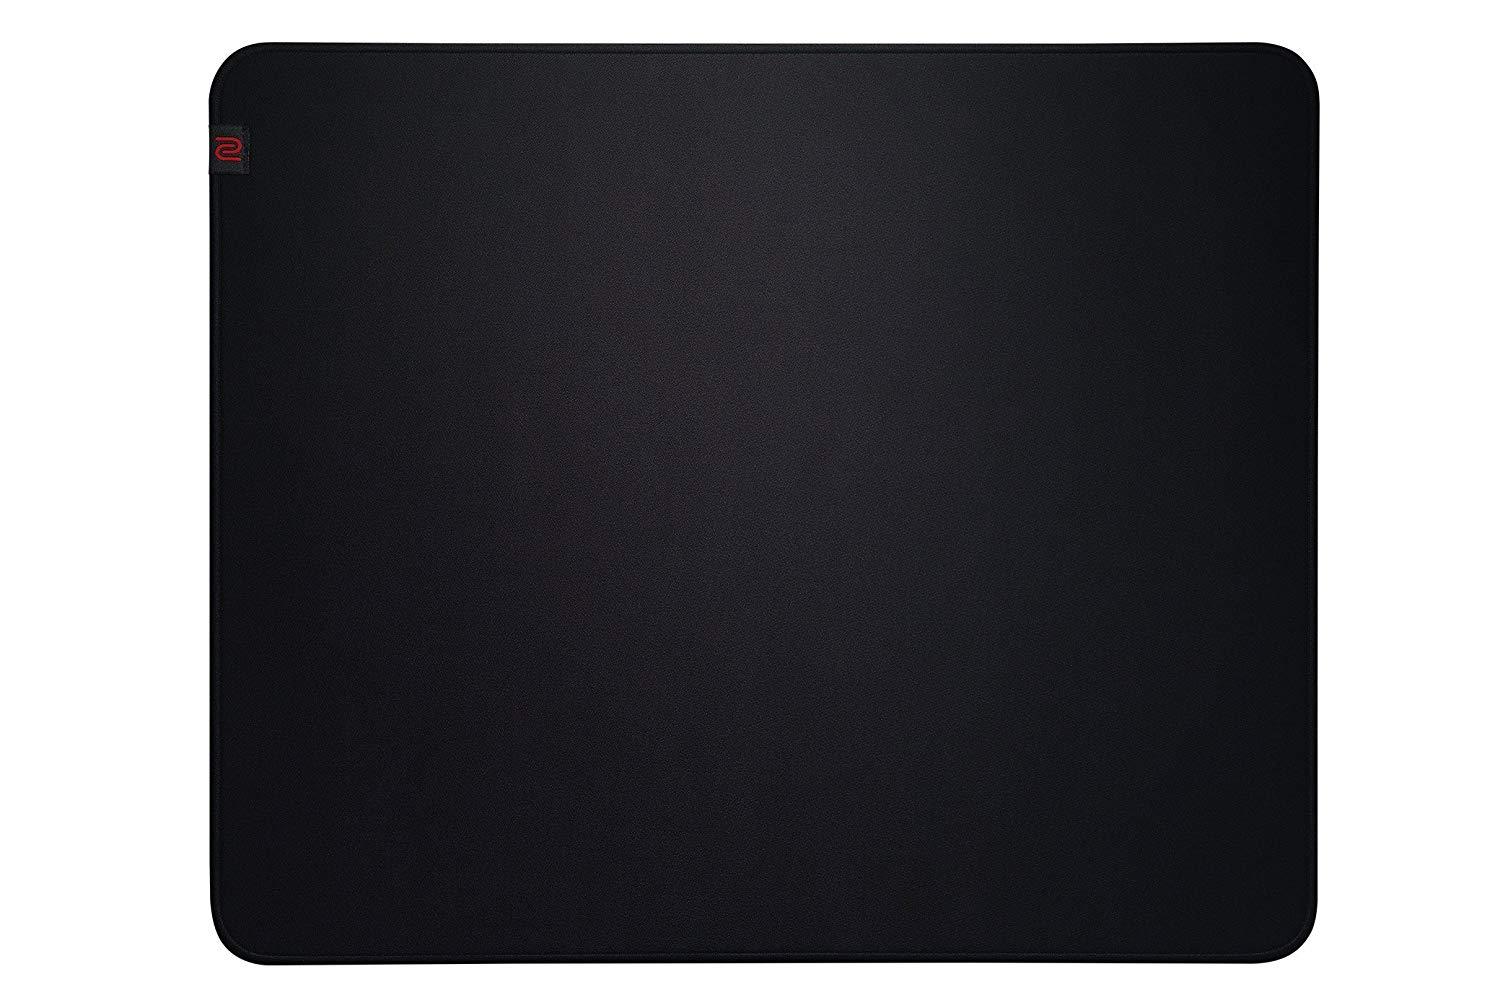 BenQ Zowie P-SR Soft Gaming Mouse Mat - Large, Black - Store 974 | ستور ٩٧٤